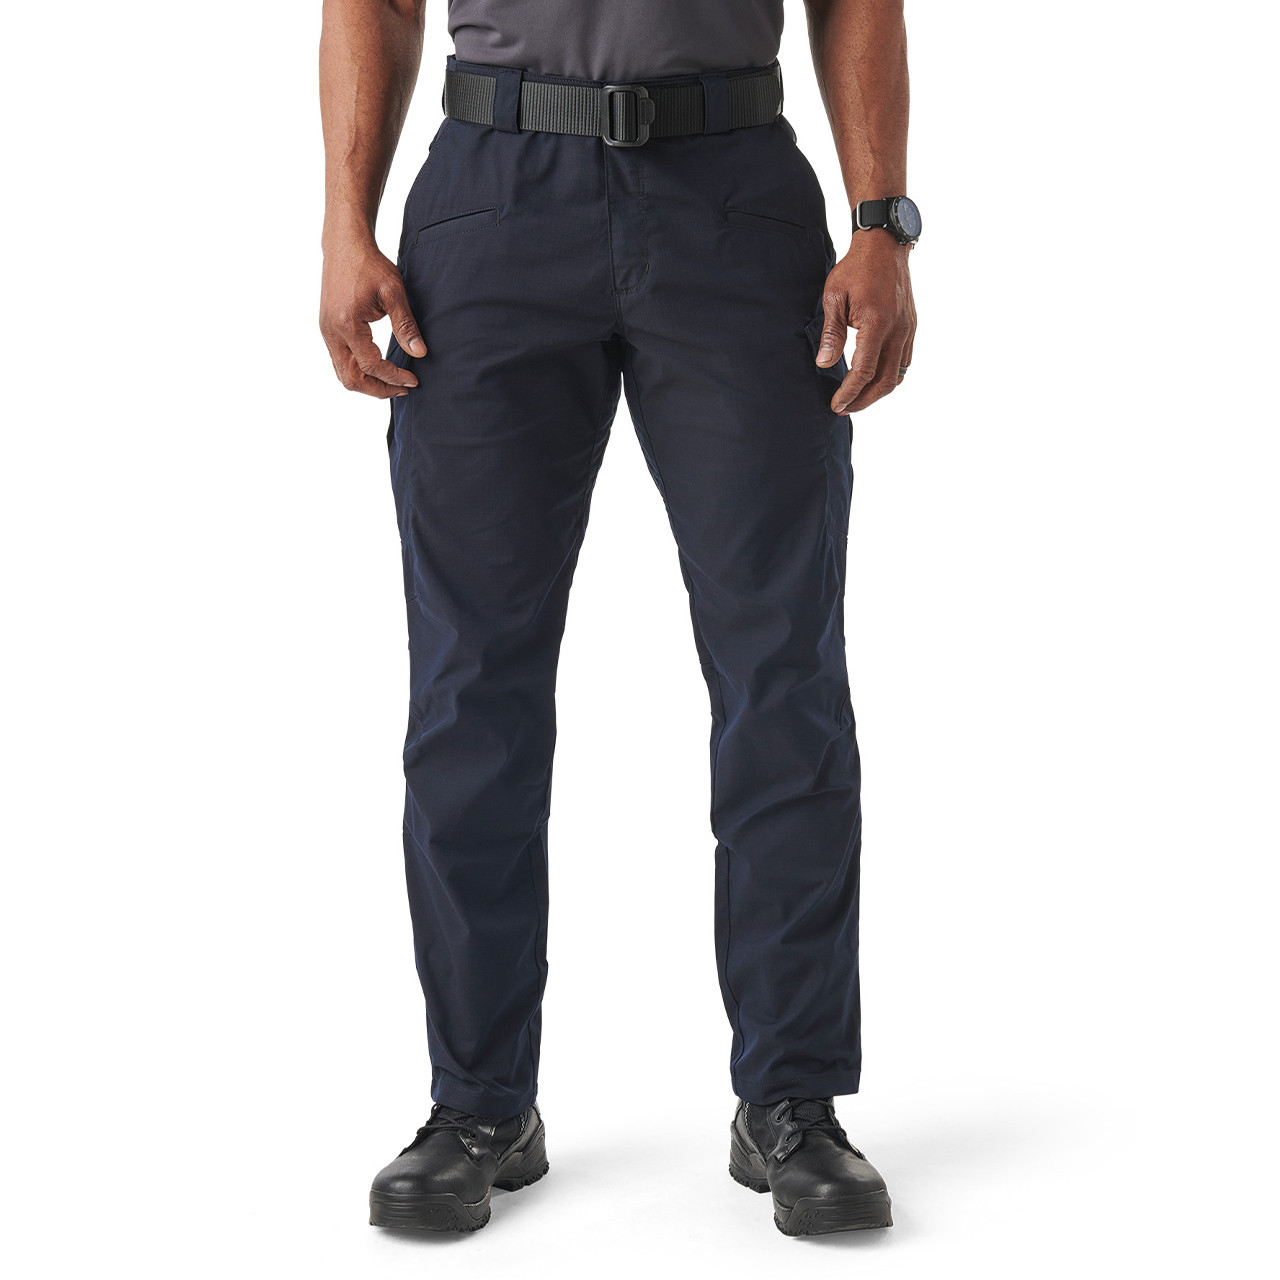 Decoy Convertible Pant: Outdoor Essential